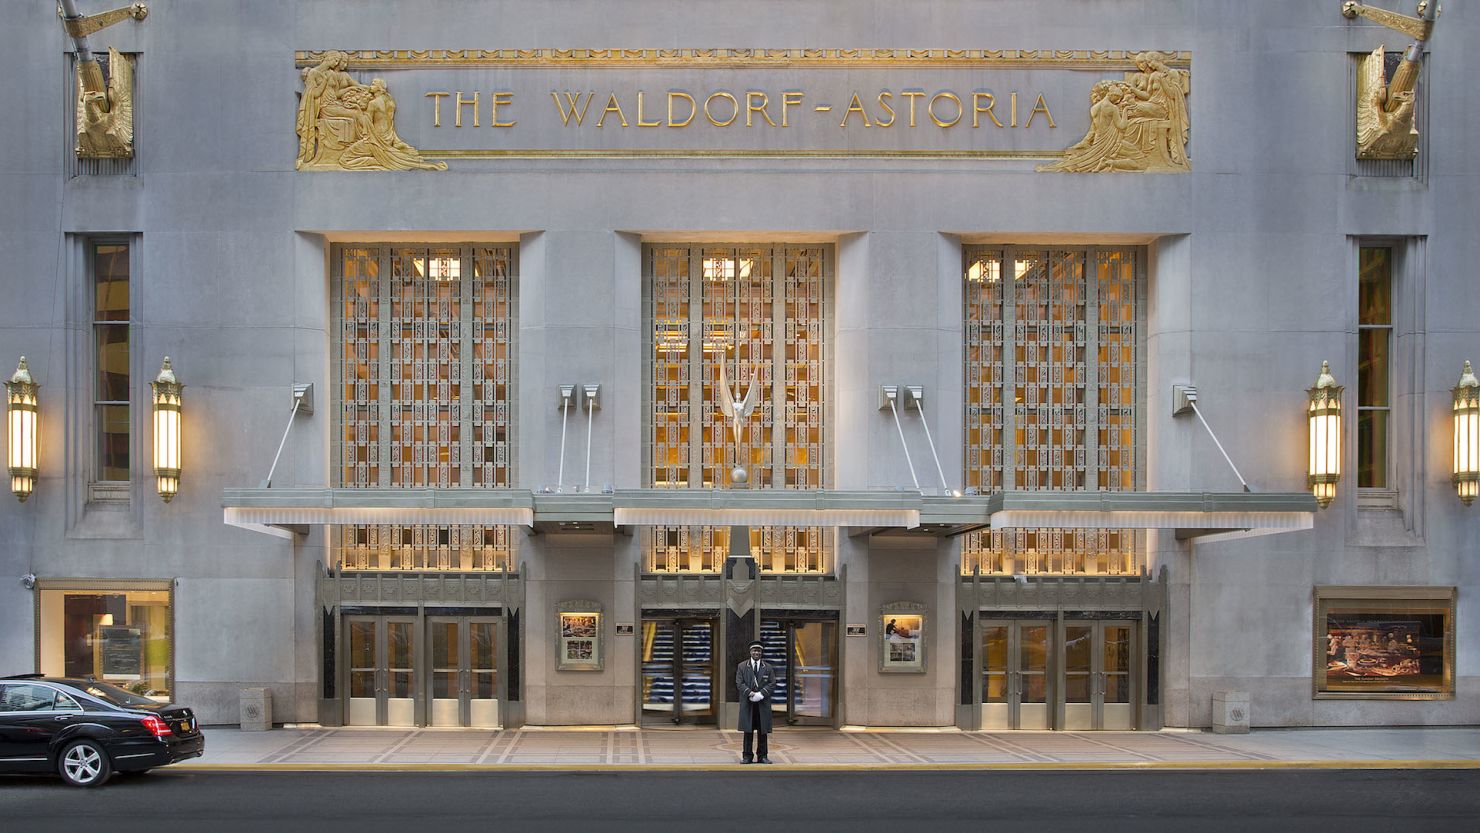 Located on Park Avenue, the Waldorf-Astoria has hosted every U.S. president from Hoover to Obama and even features a "secret" train platform beneath the hotel, used by high-security VIP guests such as Franklin Delano Roosevelt. (It is no longer operational).
